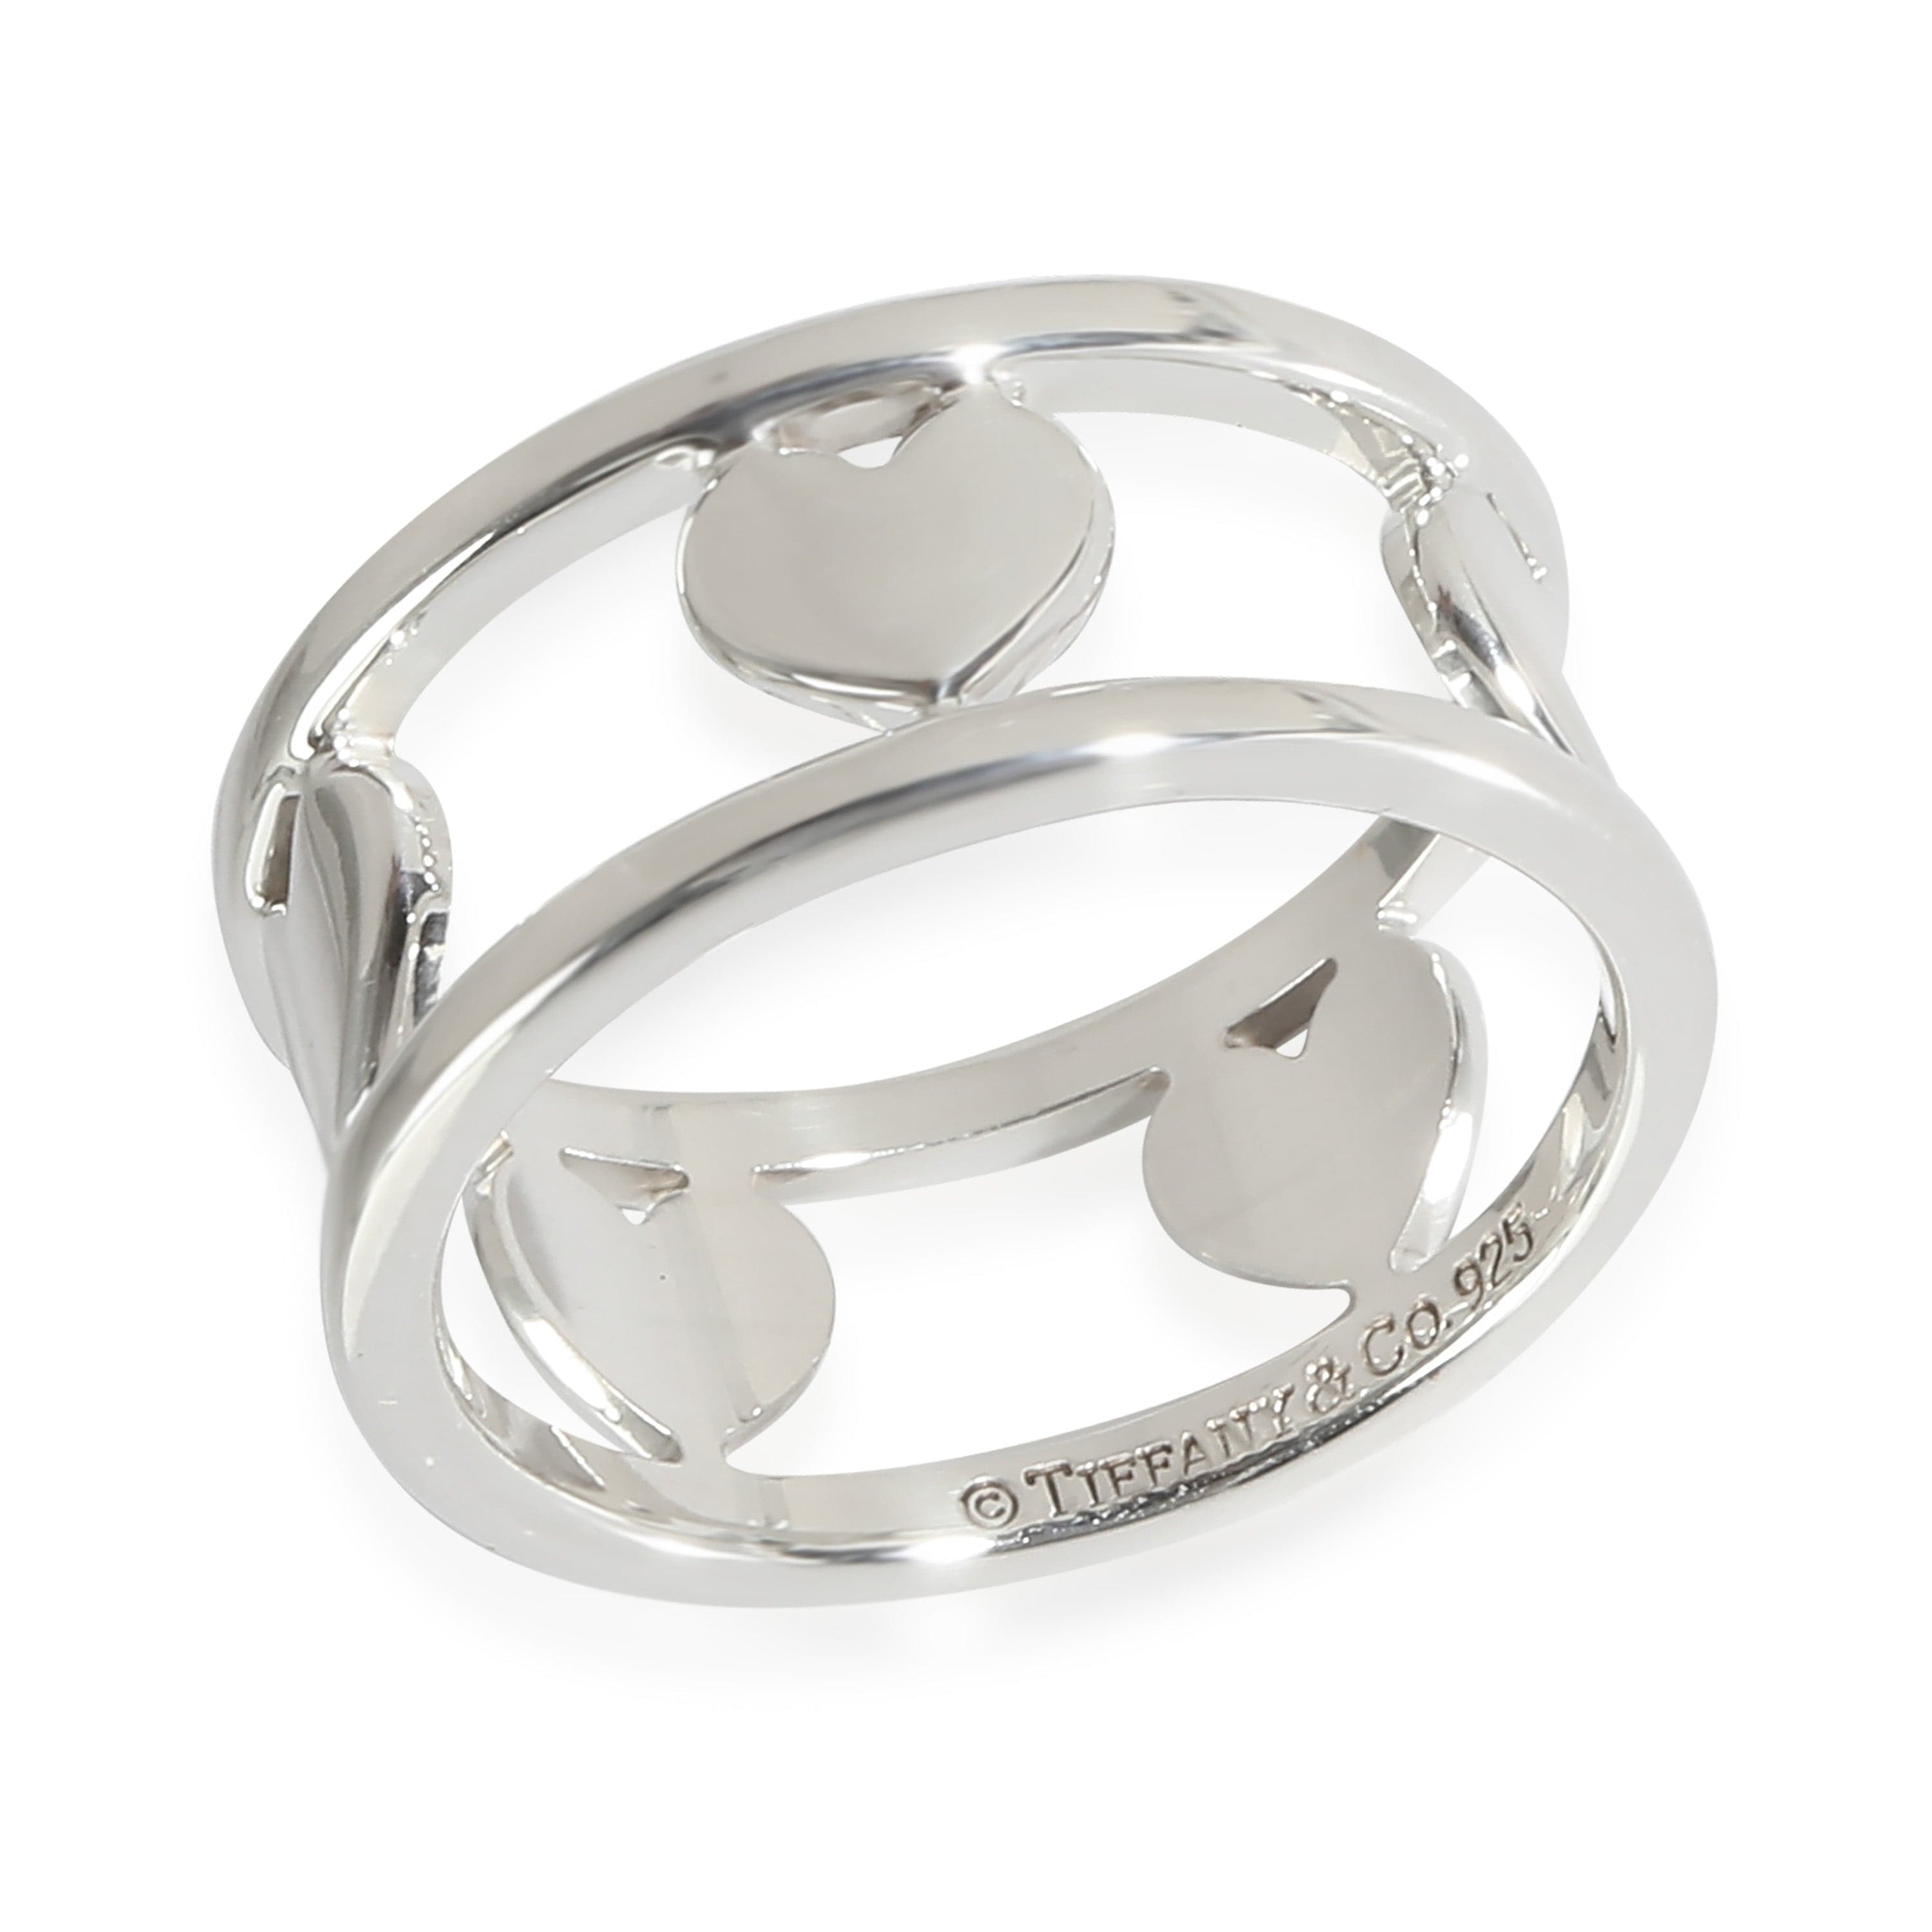 Tiffany & Co. Tiffany & Co. Cutout Heart Ring in  Sterling Silver